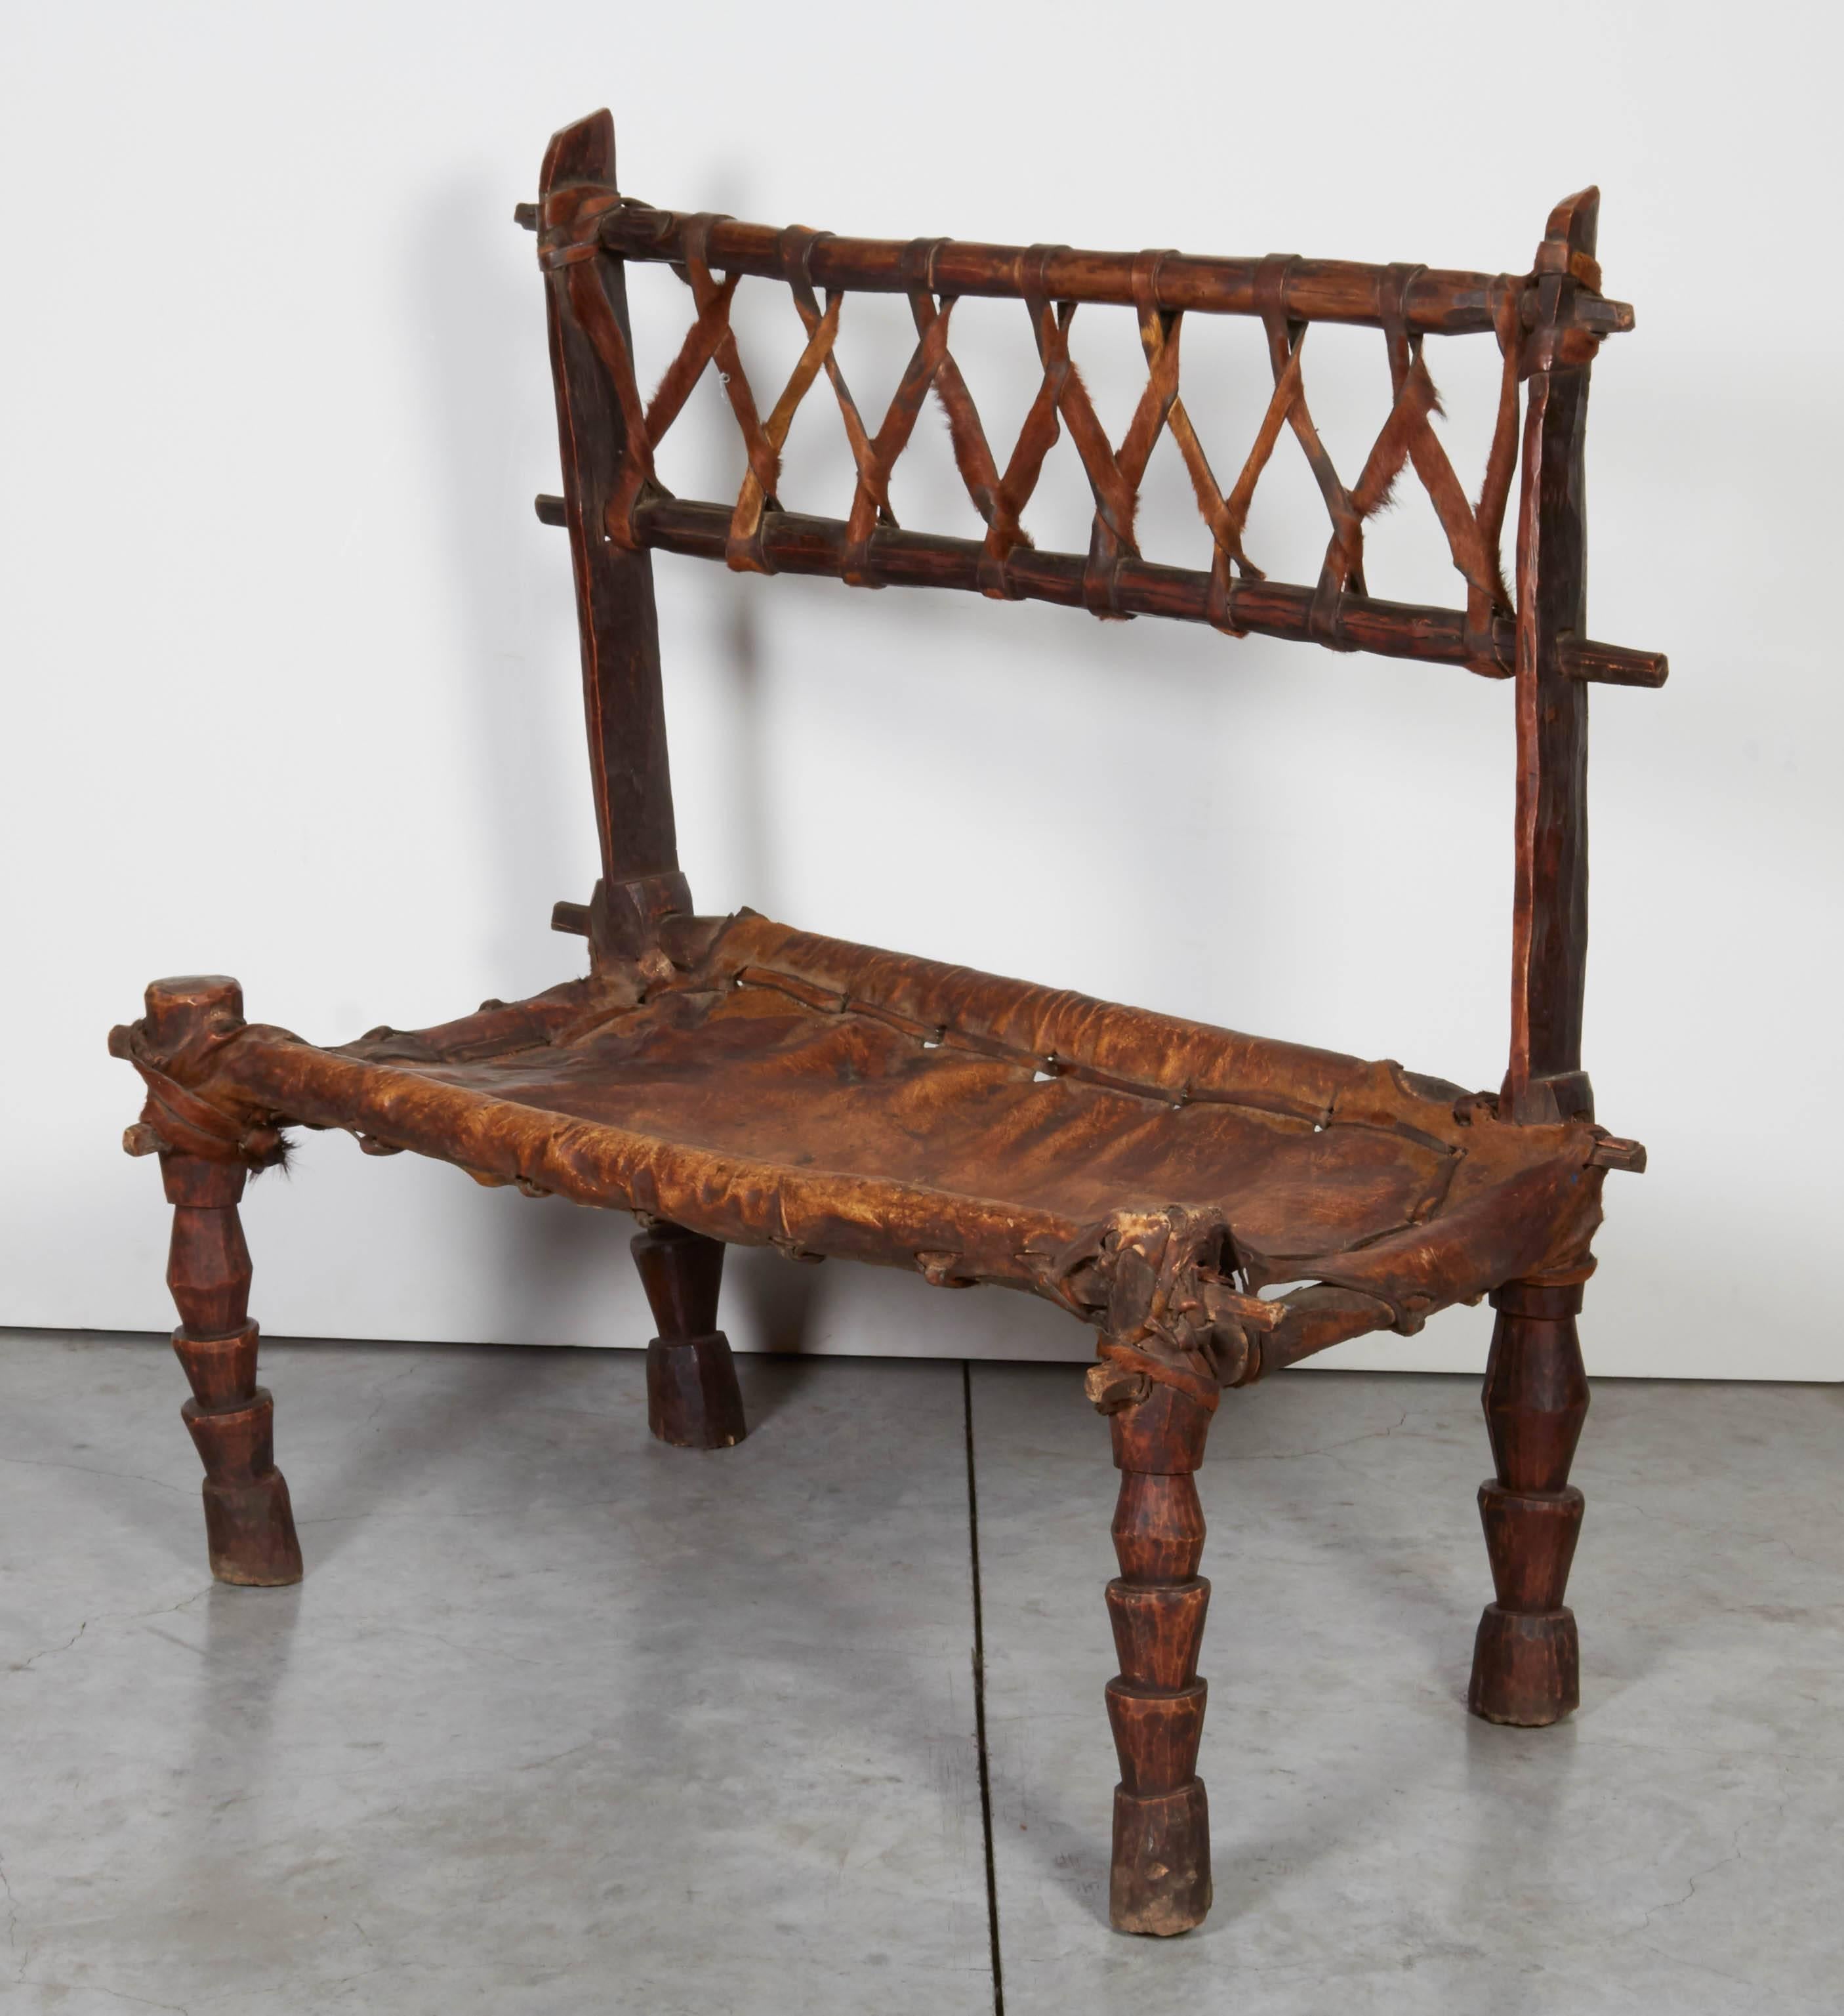 Rustic Antique Wood and Leather Bench with Great Patina and Character In Good Condition For Sale In New York, NY